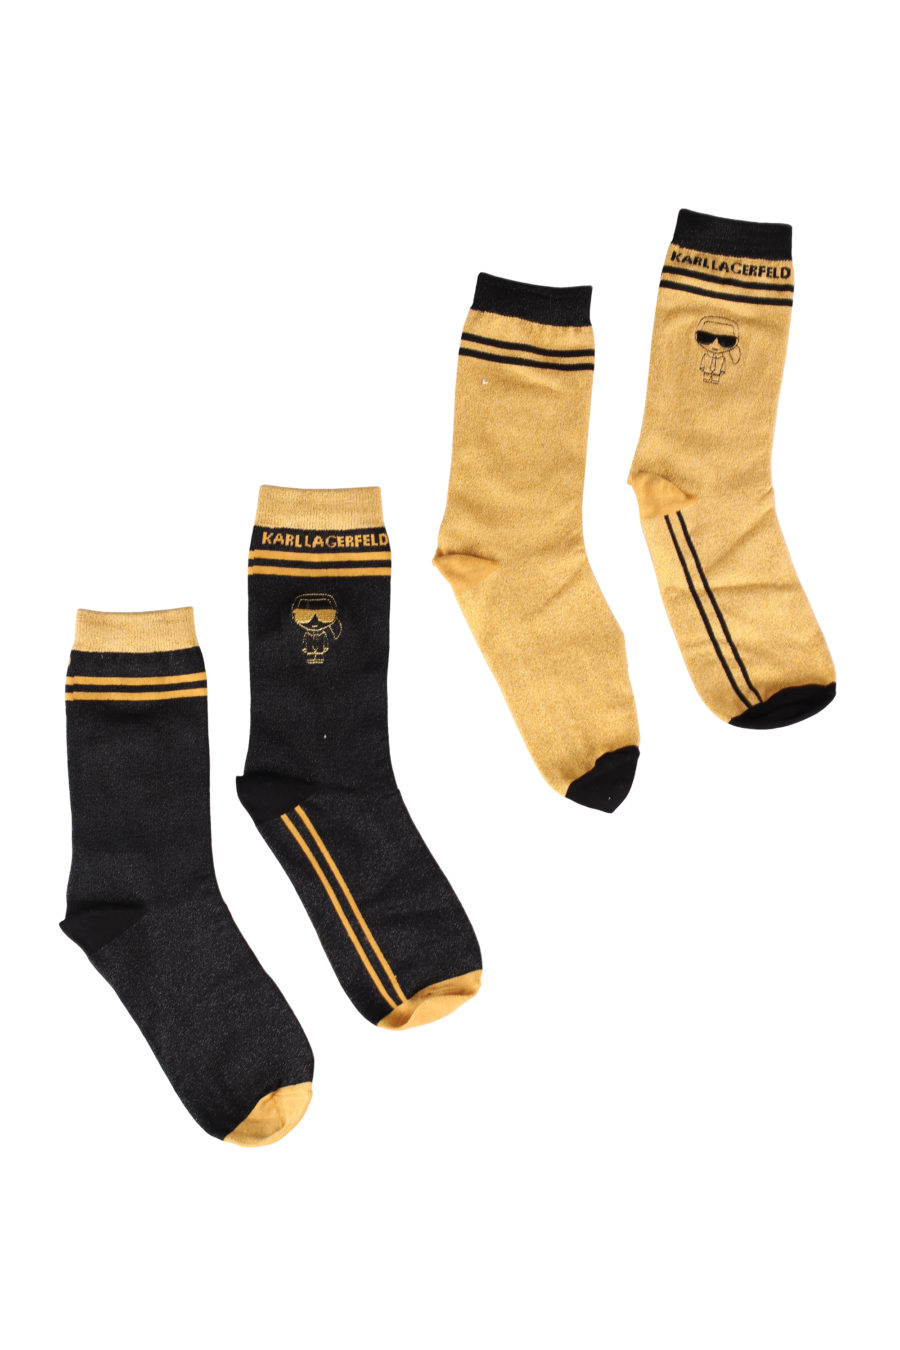 Pack of two black and gold socks with "Karl" - IMG 9657